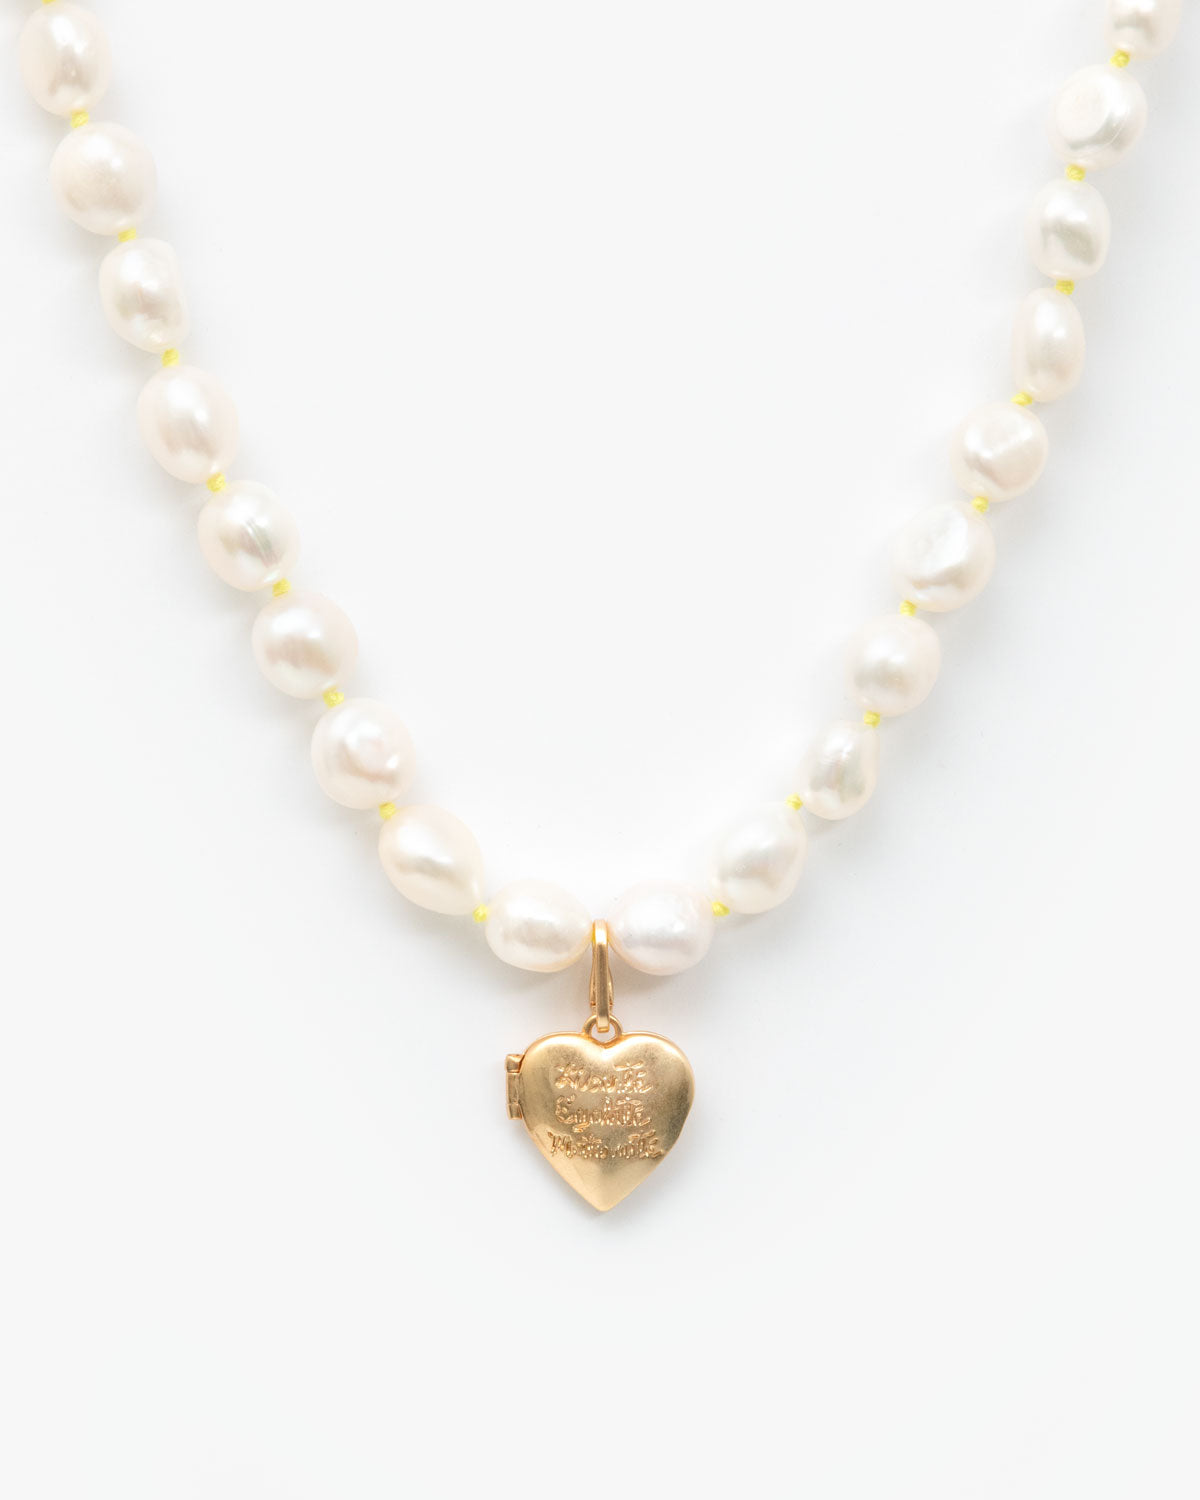  Freshwater Pearl Necklace with the Heart Locket Charm